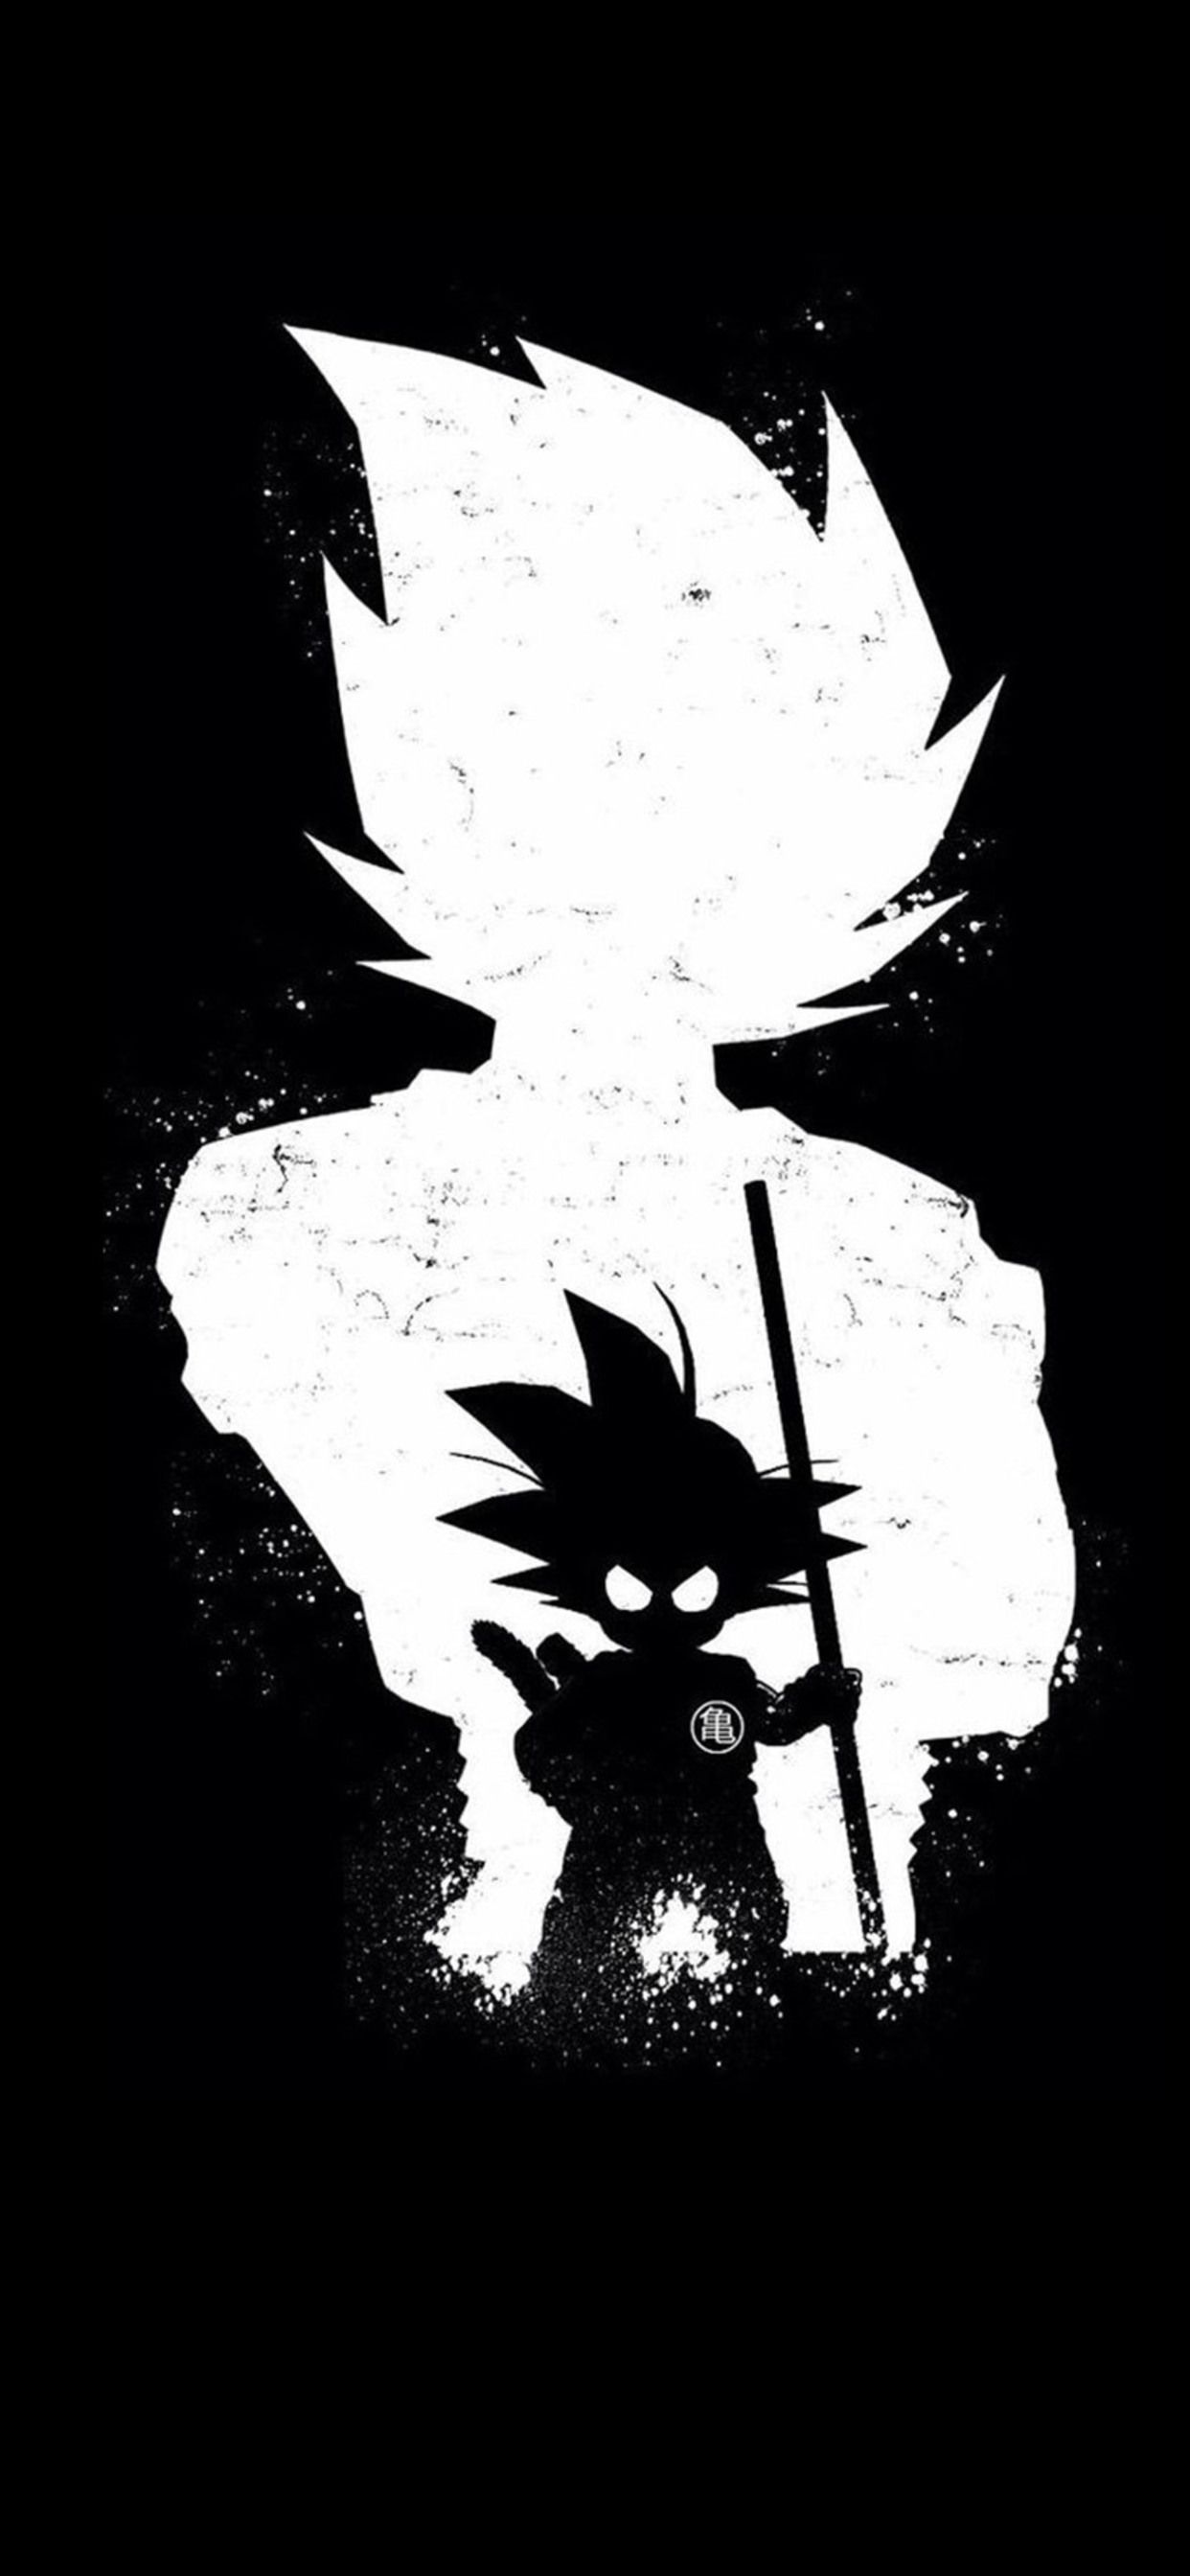 Naruto Wallpaper For iPhone Xs Max. Anime wallpaper